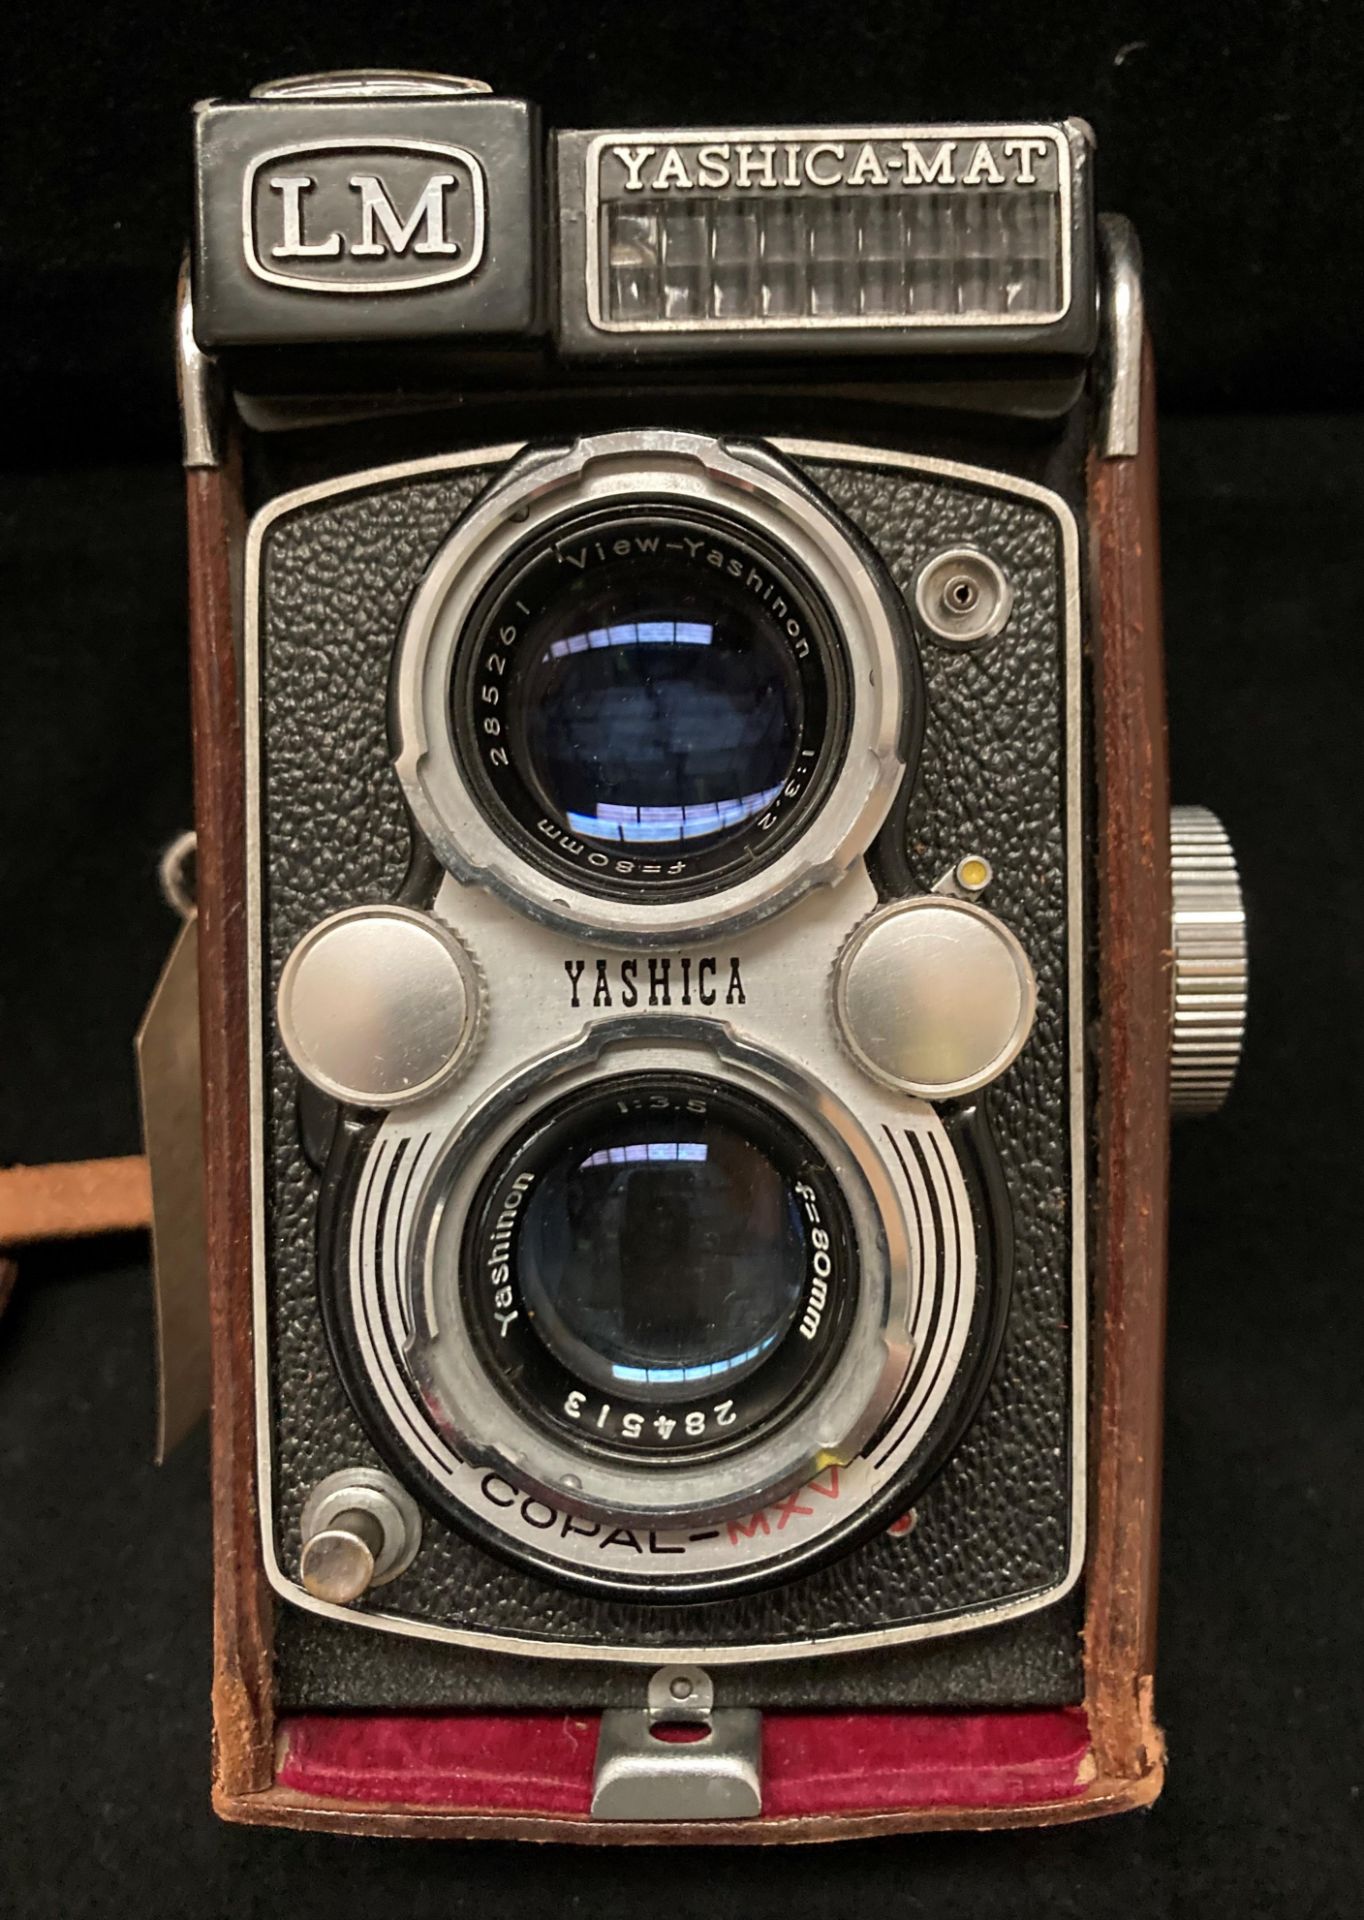 A Yashica-Mat LM Copal-MXV camera with Yashinon 1:3.5 F=80mm + view andYashinon 1:3. - Image 2 of 4